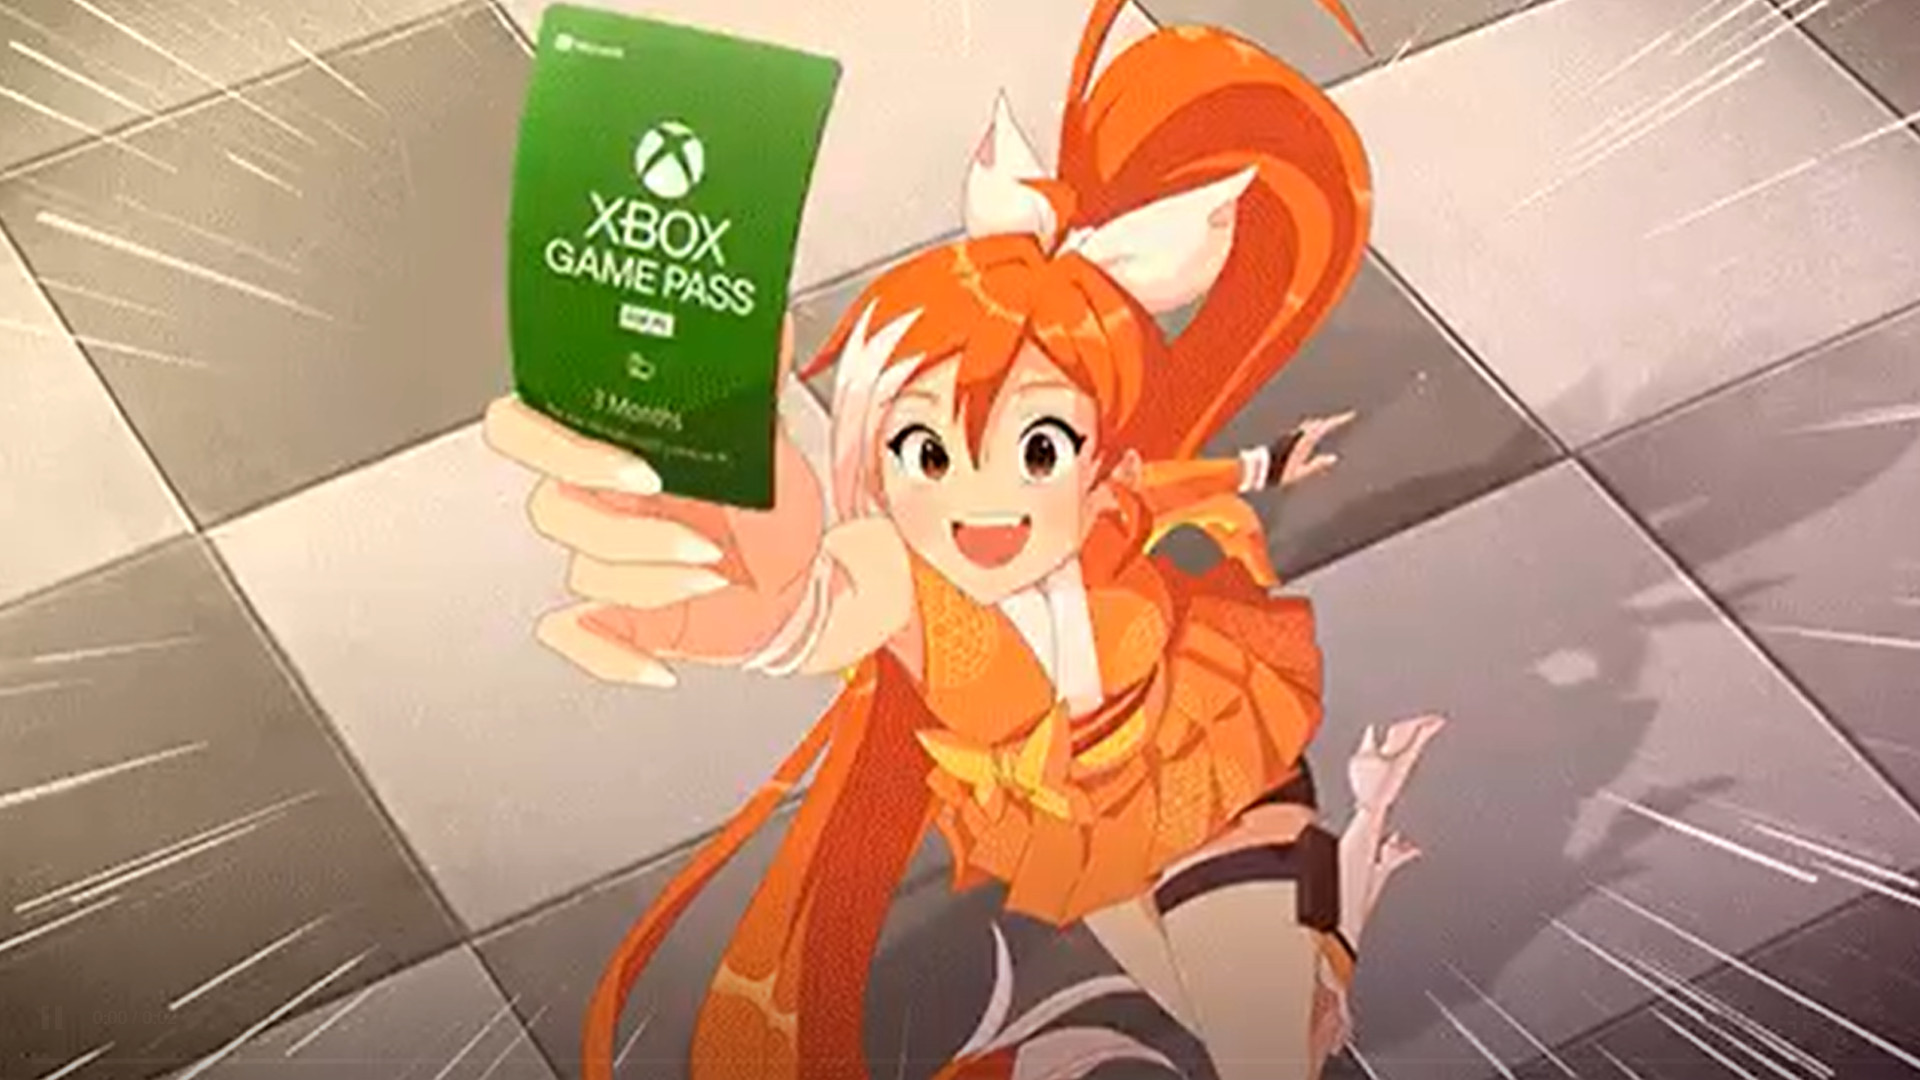 Anime gave you free Game Pass, so now Game Pass gives you free anime